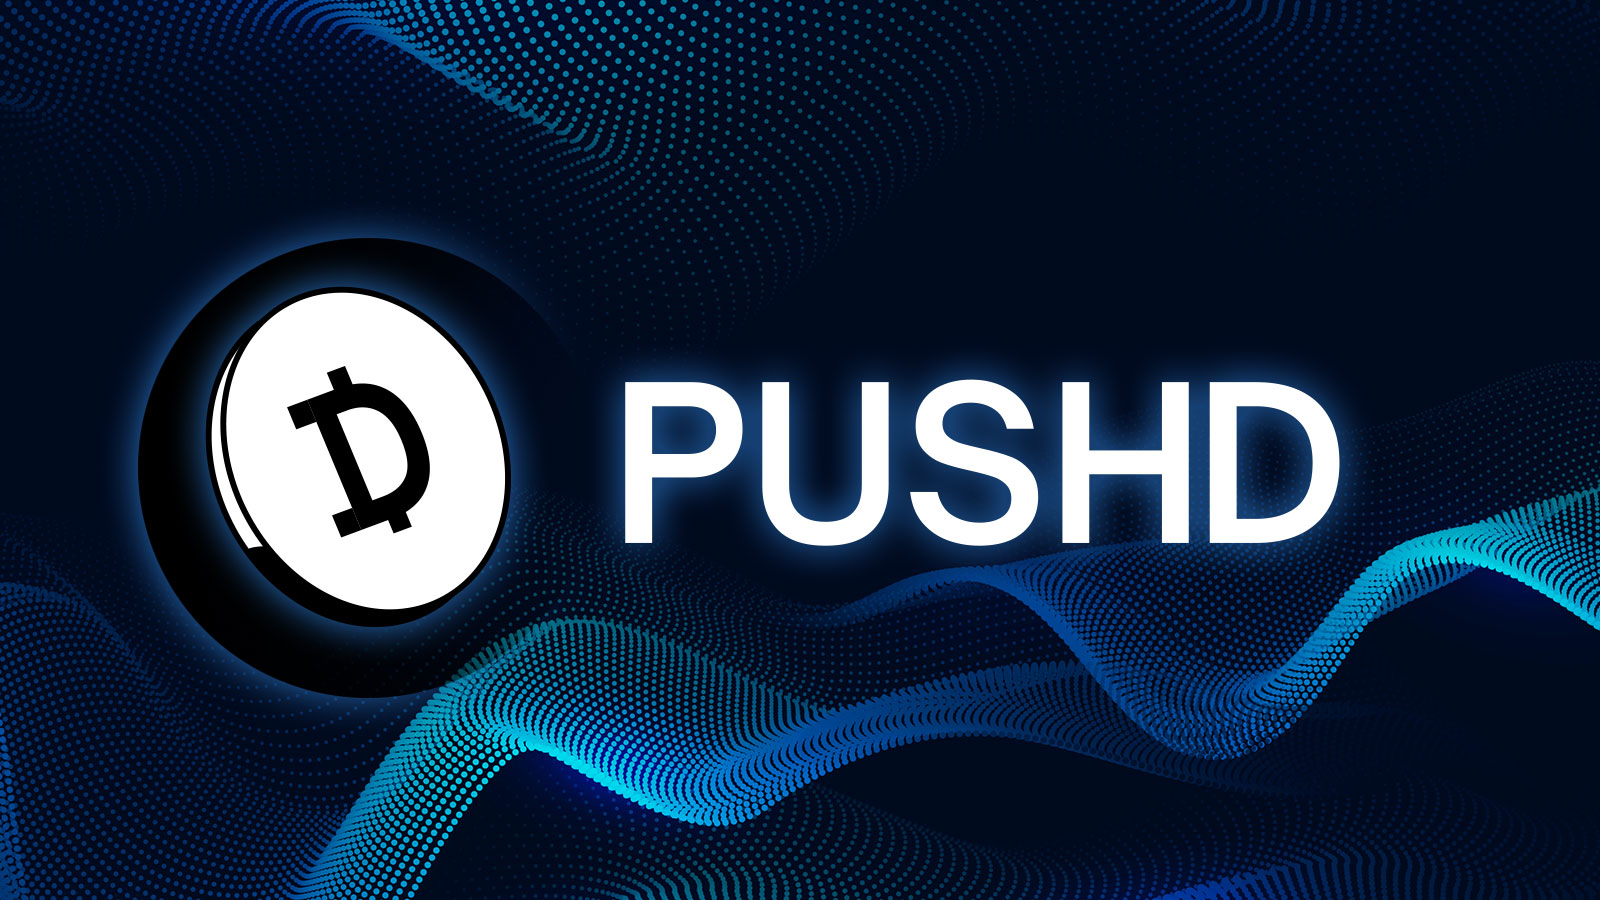 Pushd (PUSHD) Pre-Sale Welcomes New Supporters in January, as Bitcoin (BTC) and Ethereum (ETH) Holders Waiting for ETF Approval